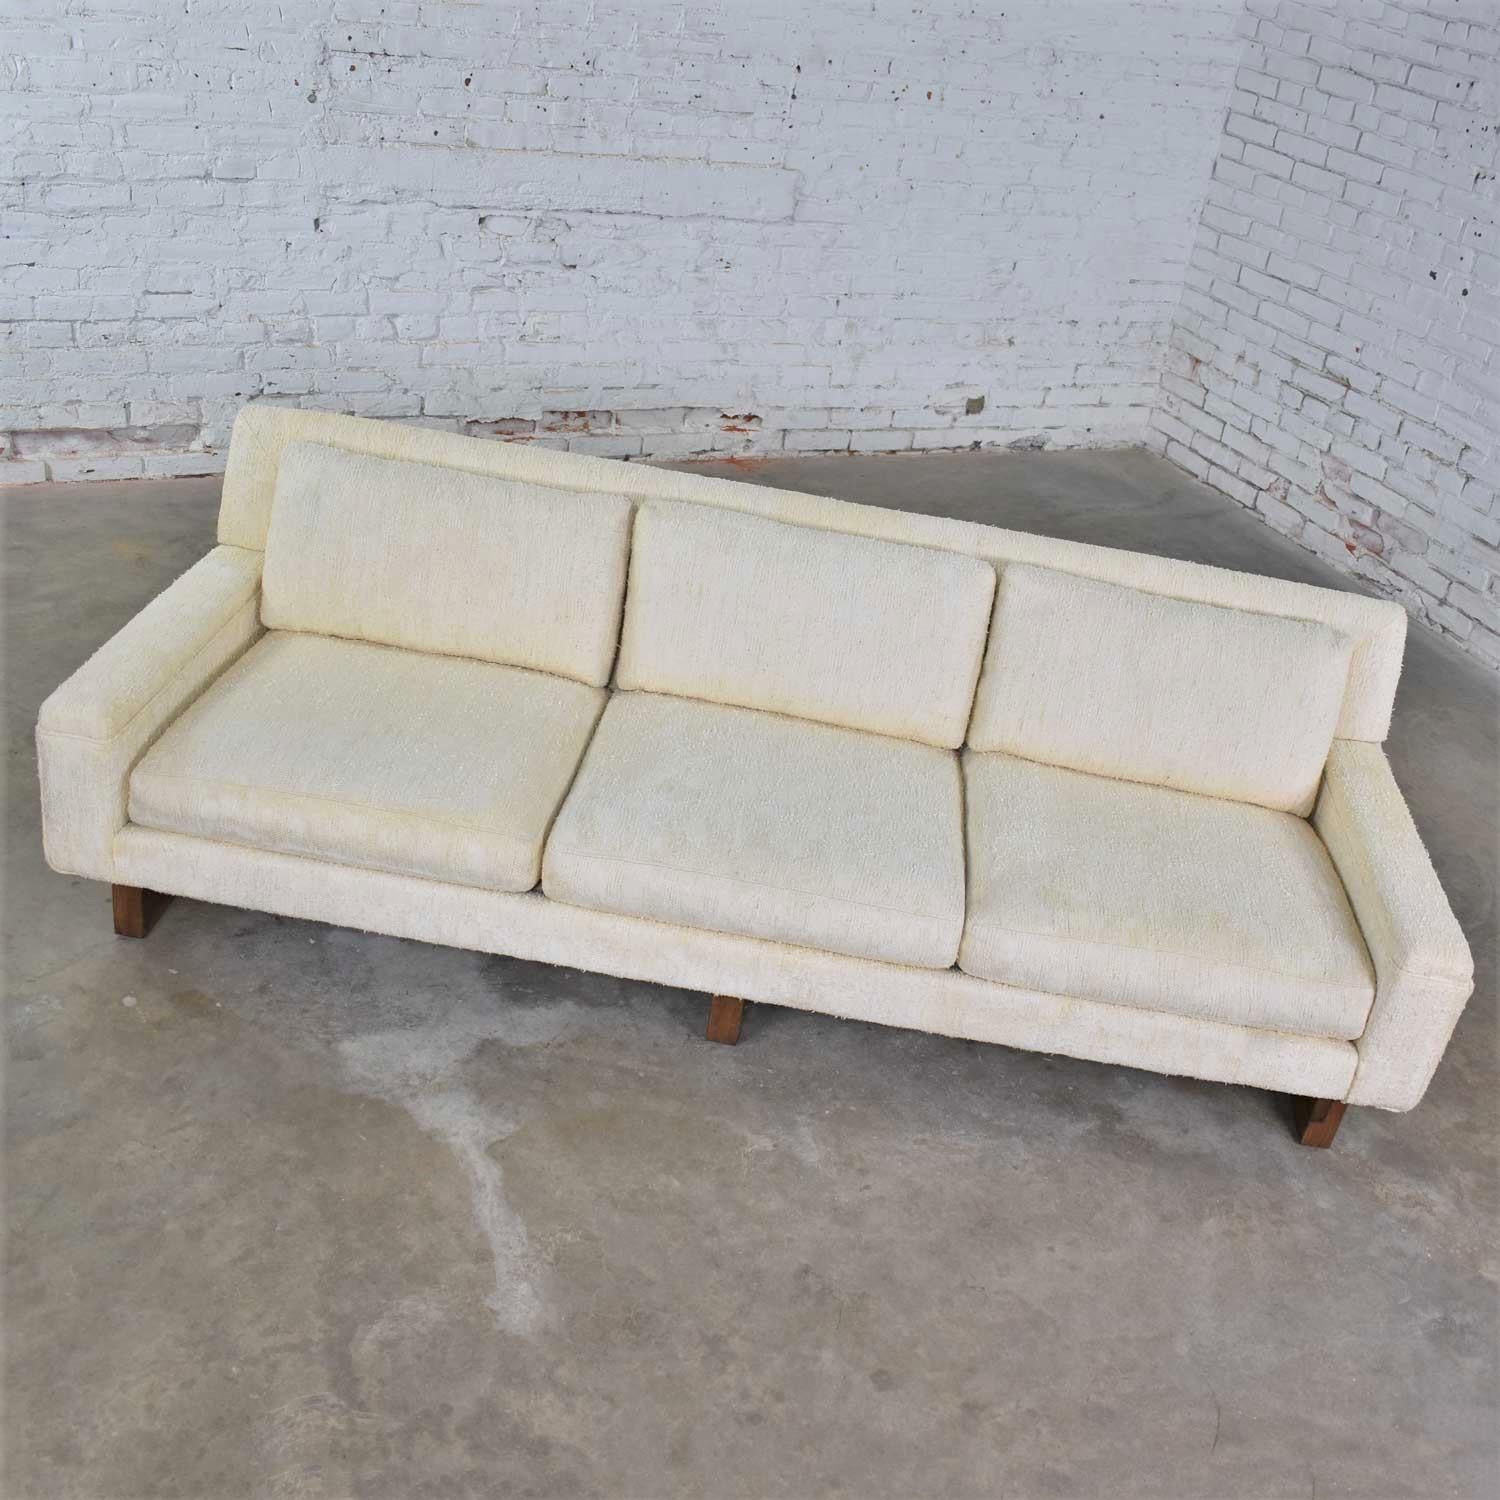 American Mid-Century Modern Lawson Style White Sofa by Flair Division for Bernhardt